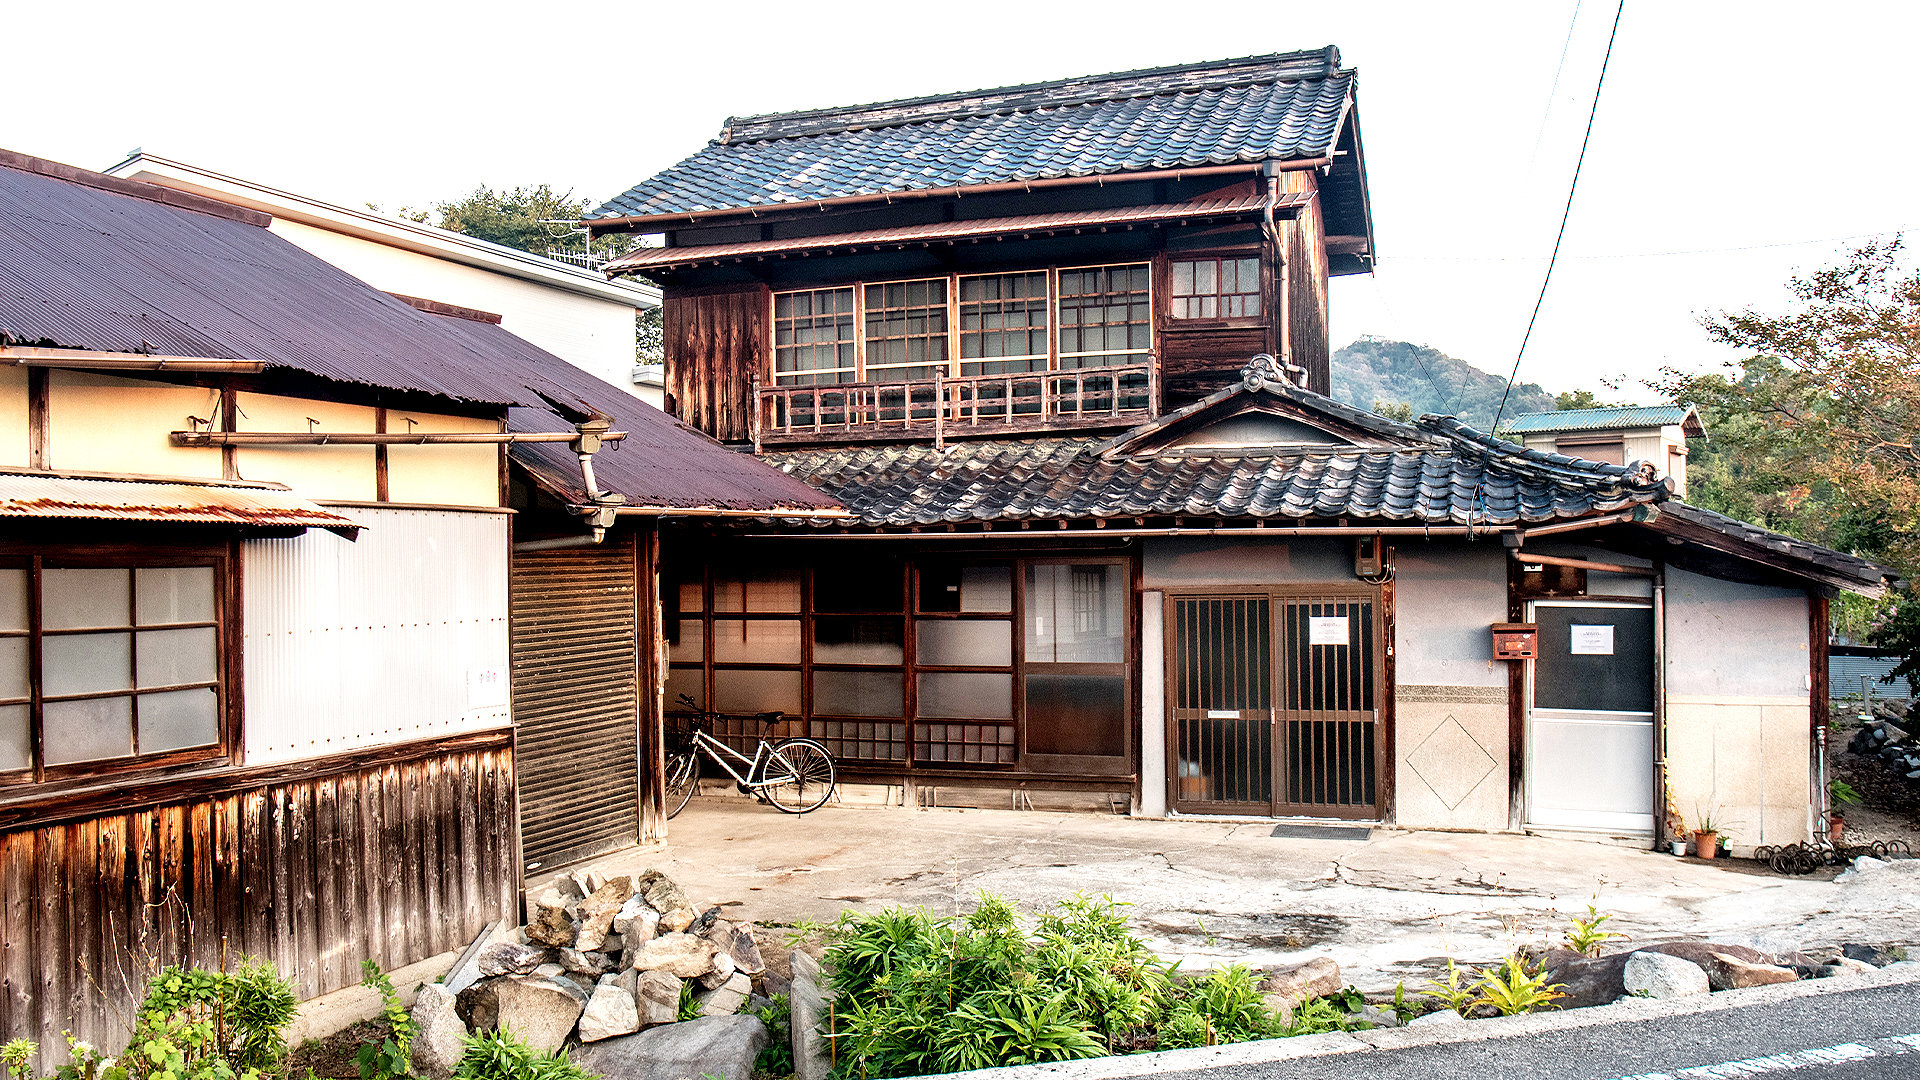 Hollowing out: the scourge of Japan’s empty homes